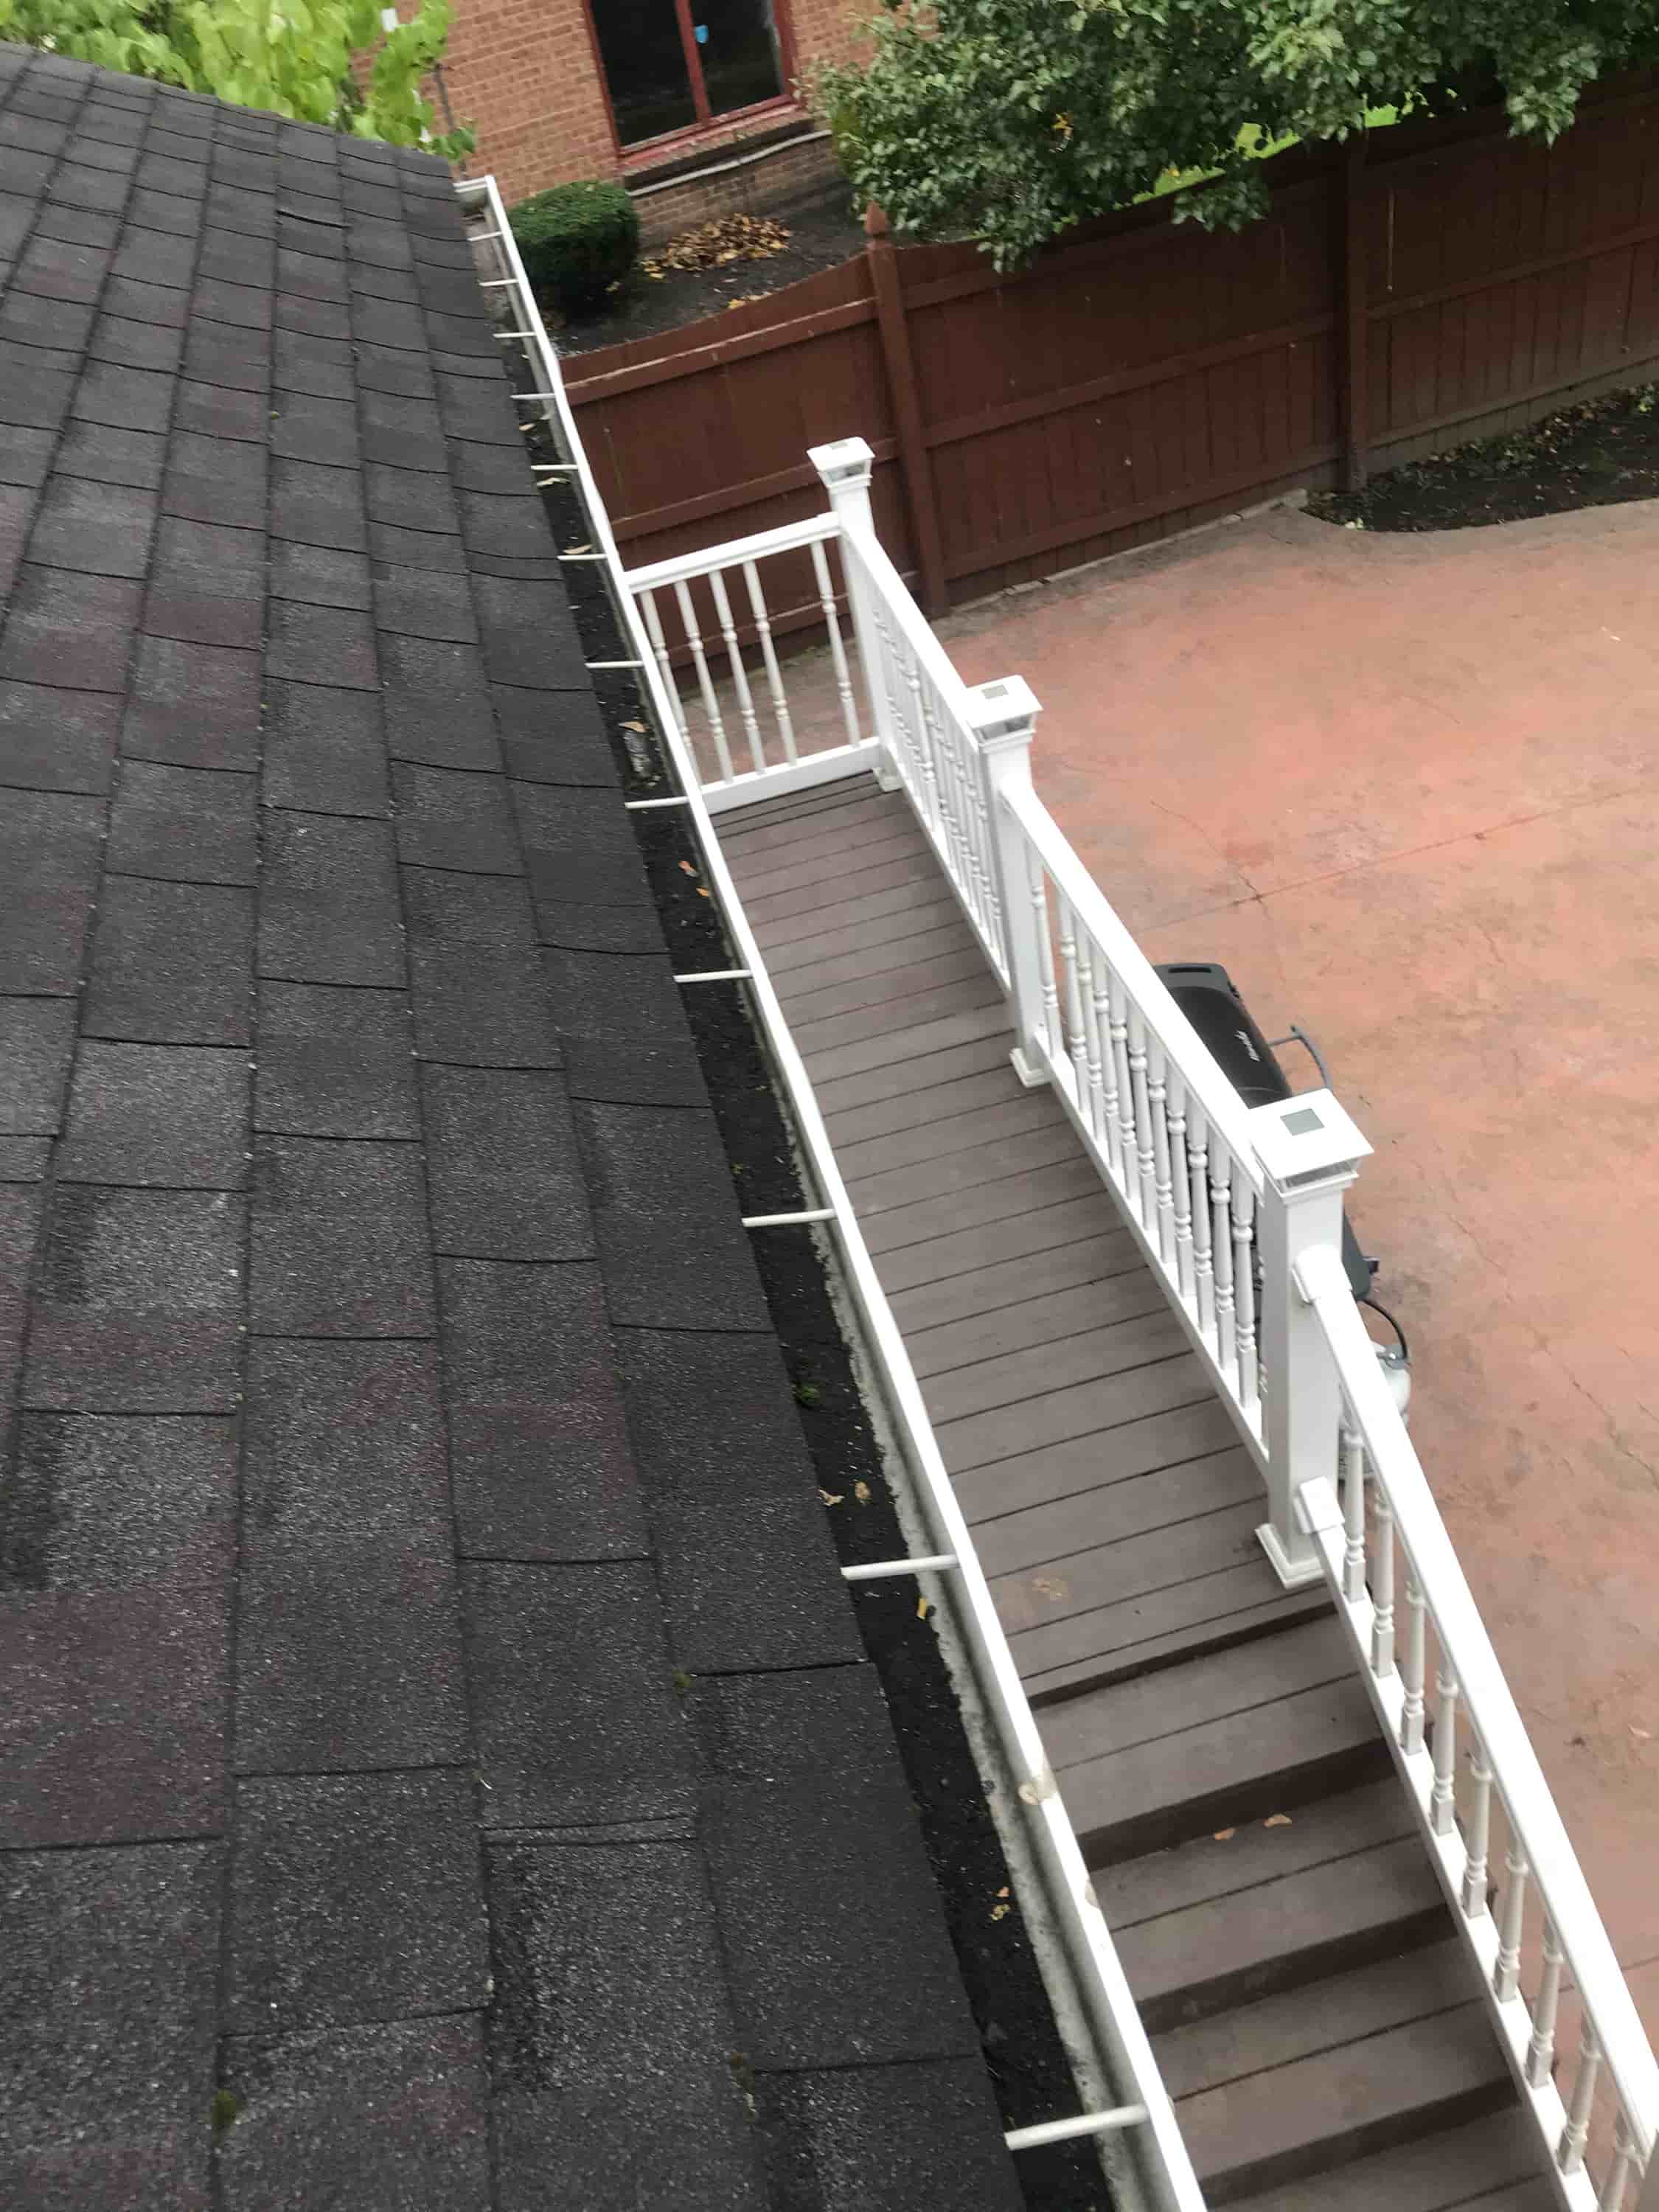 residential gutter cleaning near me